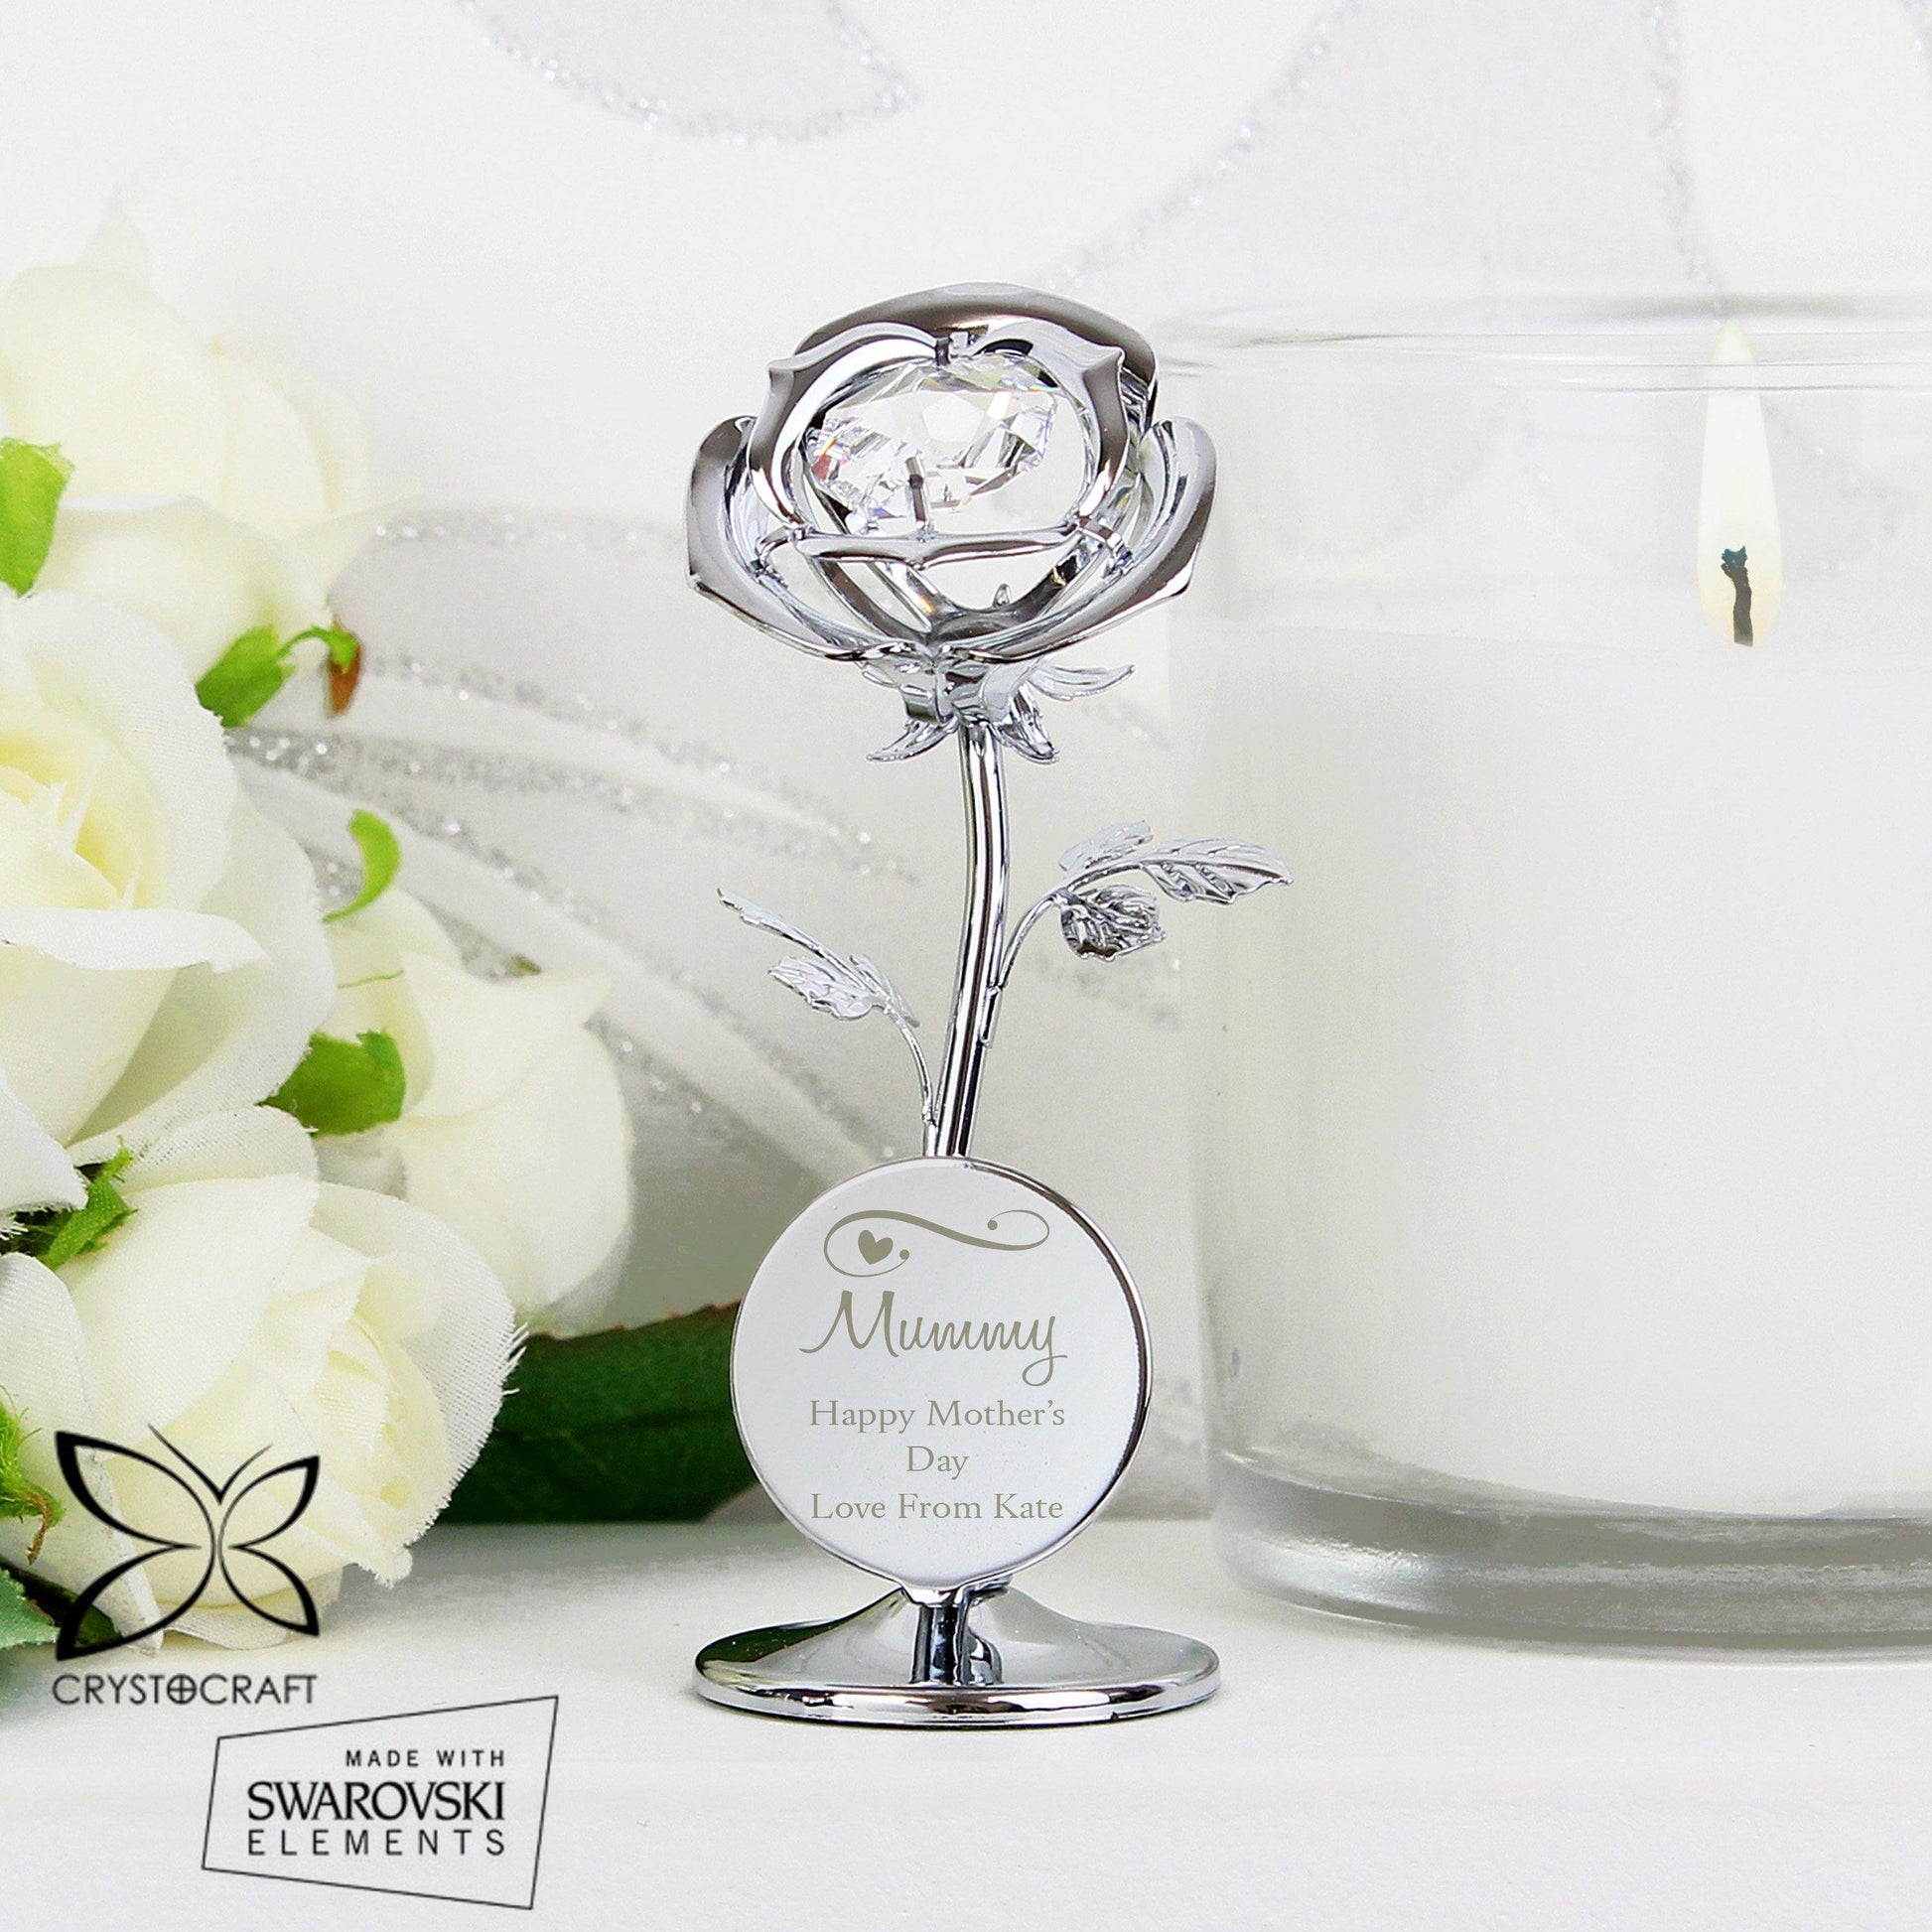 Personalised Silver Swirls & Hearts Crystocraft Rose Ornament - Kporium Home & Garden